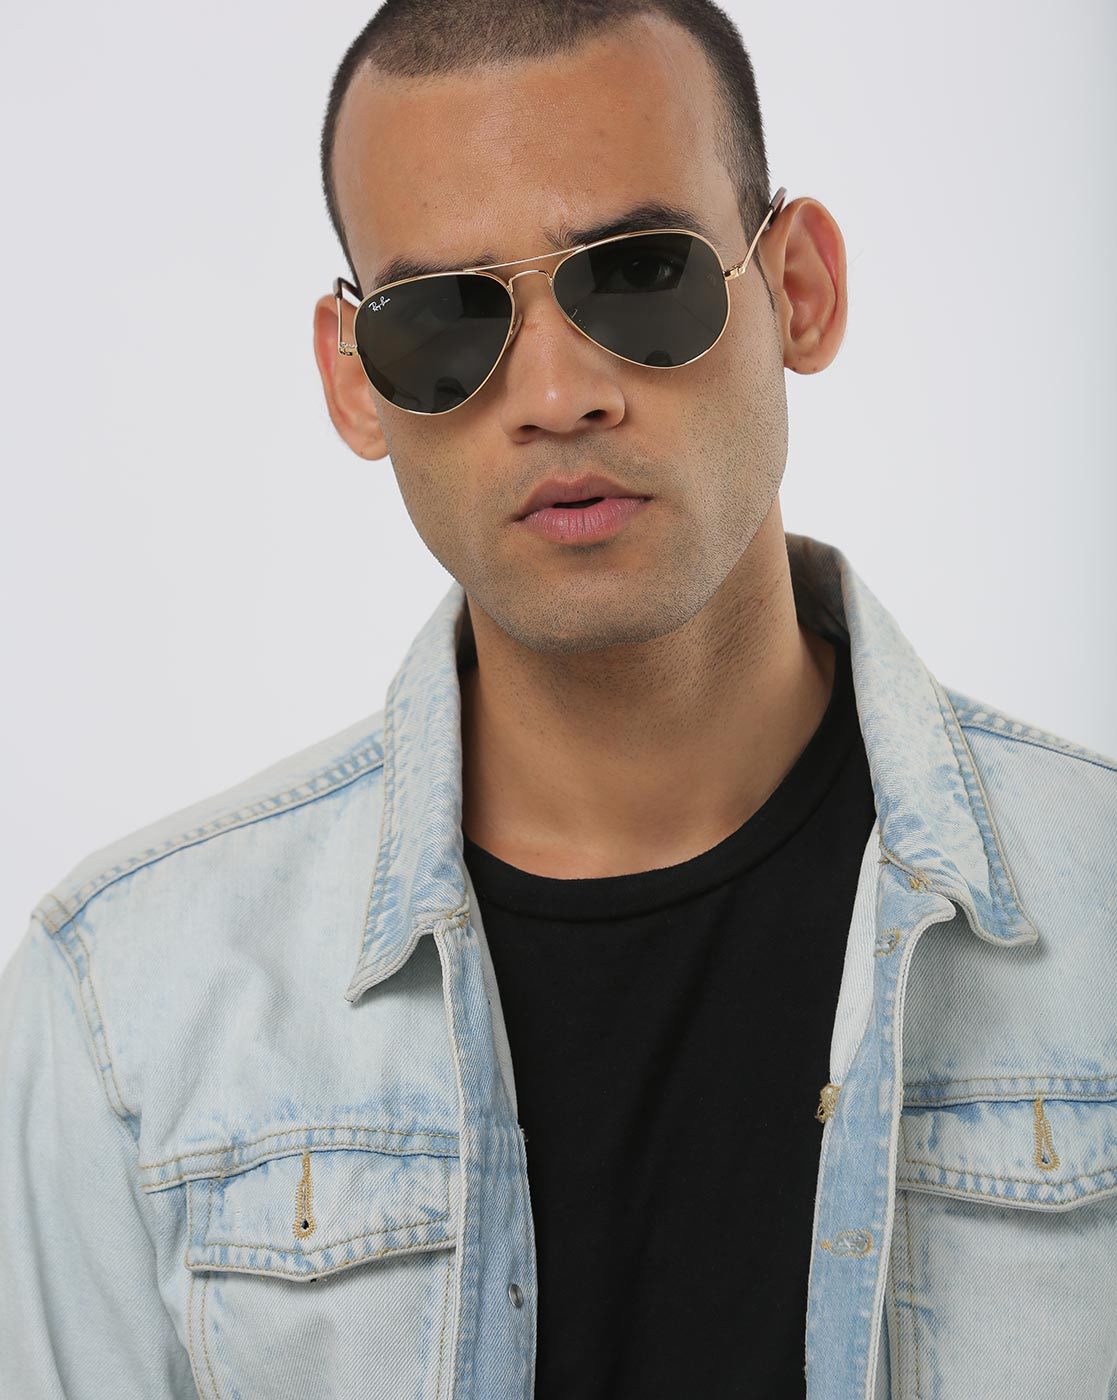 Buy Gold-Toned Sunglasses for Men by Ray Ban Online 